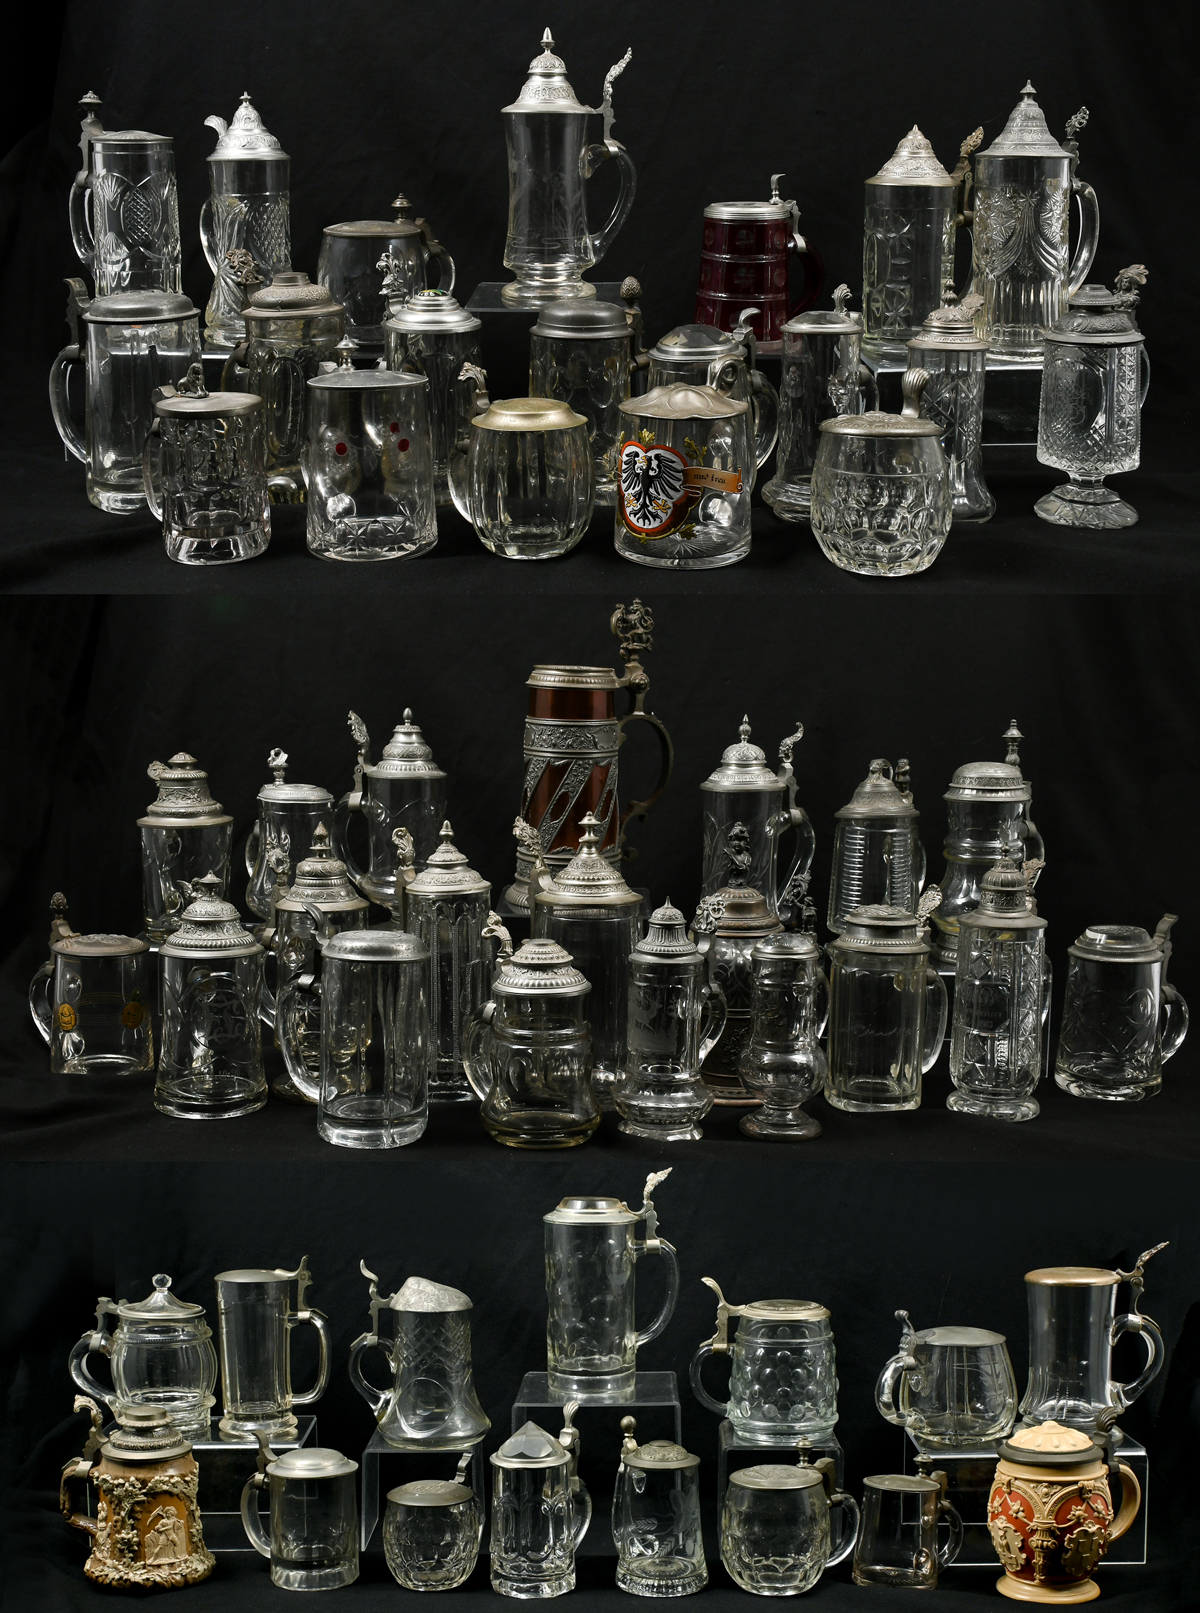 MASSIVE STEIN COLLECTION: 1) Large